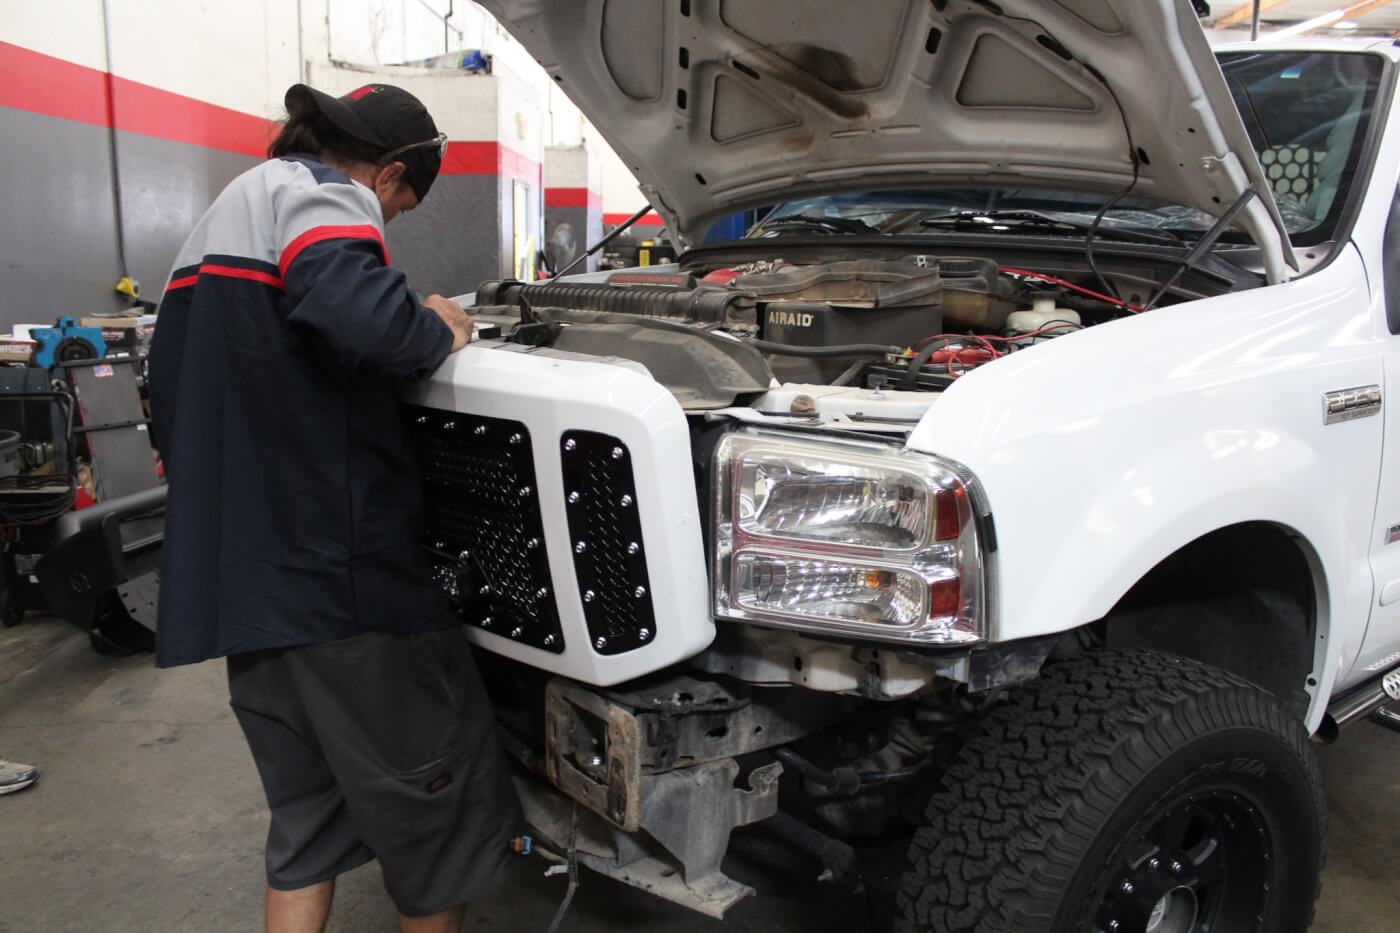 16. Once assembly is complete, reinstalling the grille assembly is a simple matter. The grille can be installed with the factory bumper in place, but removing it will make the job much easier. If you have an aftermarket bumper, removal will most likely be mandatory.